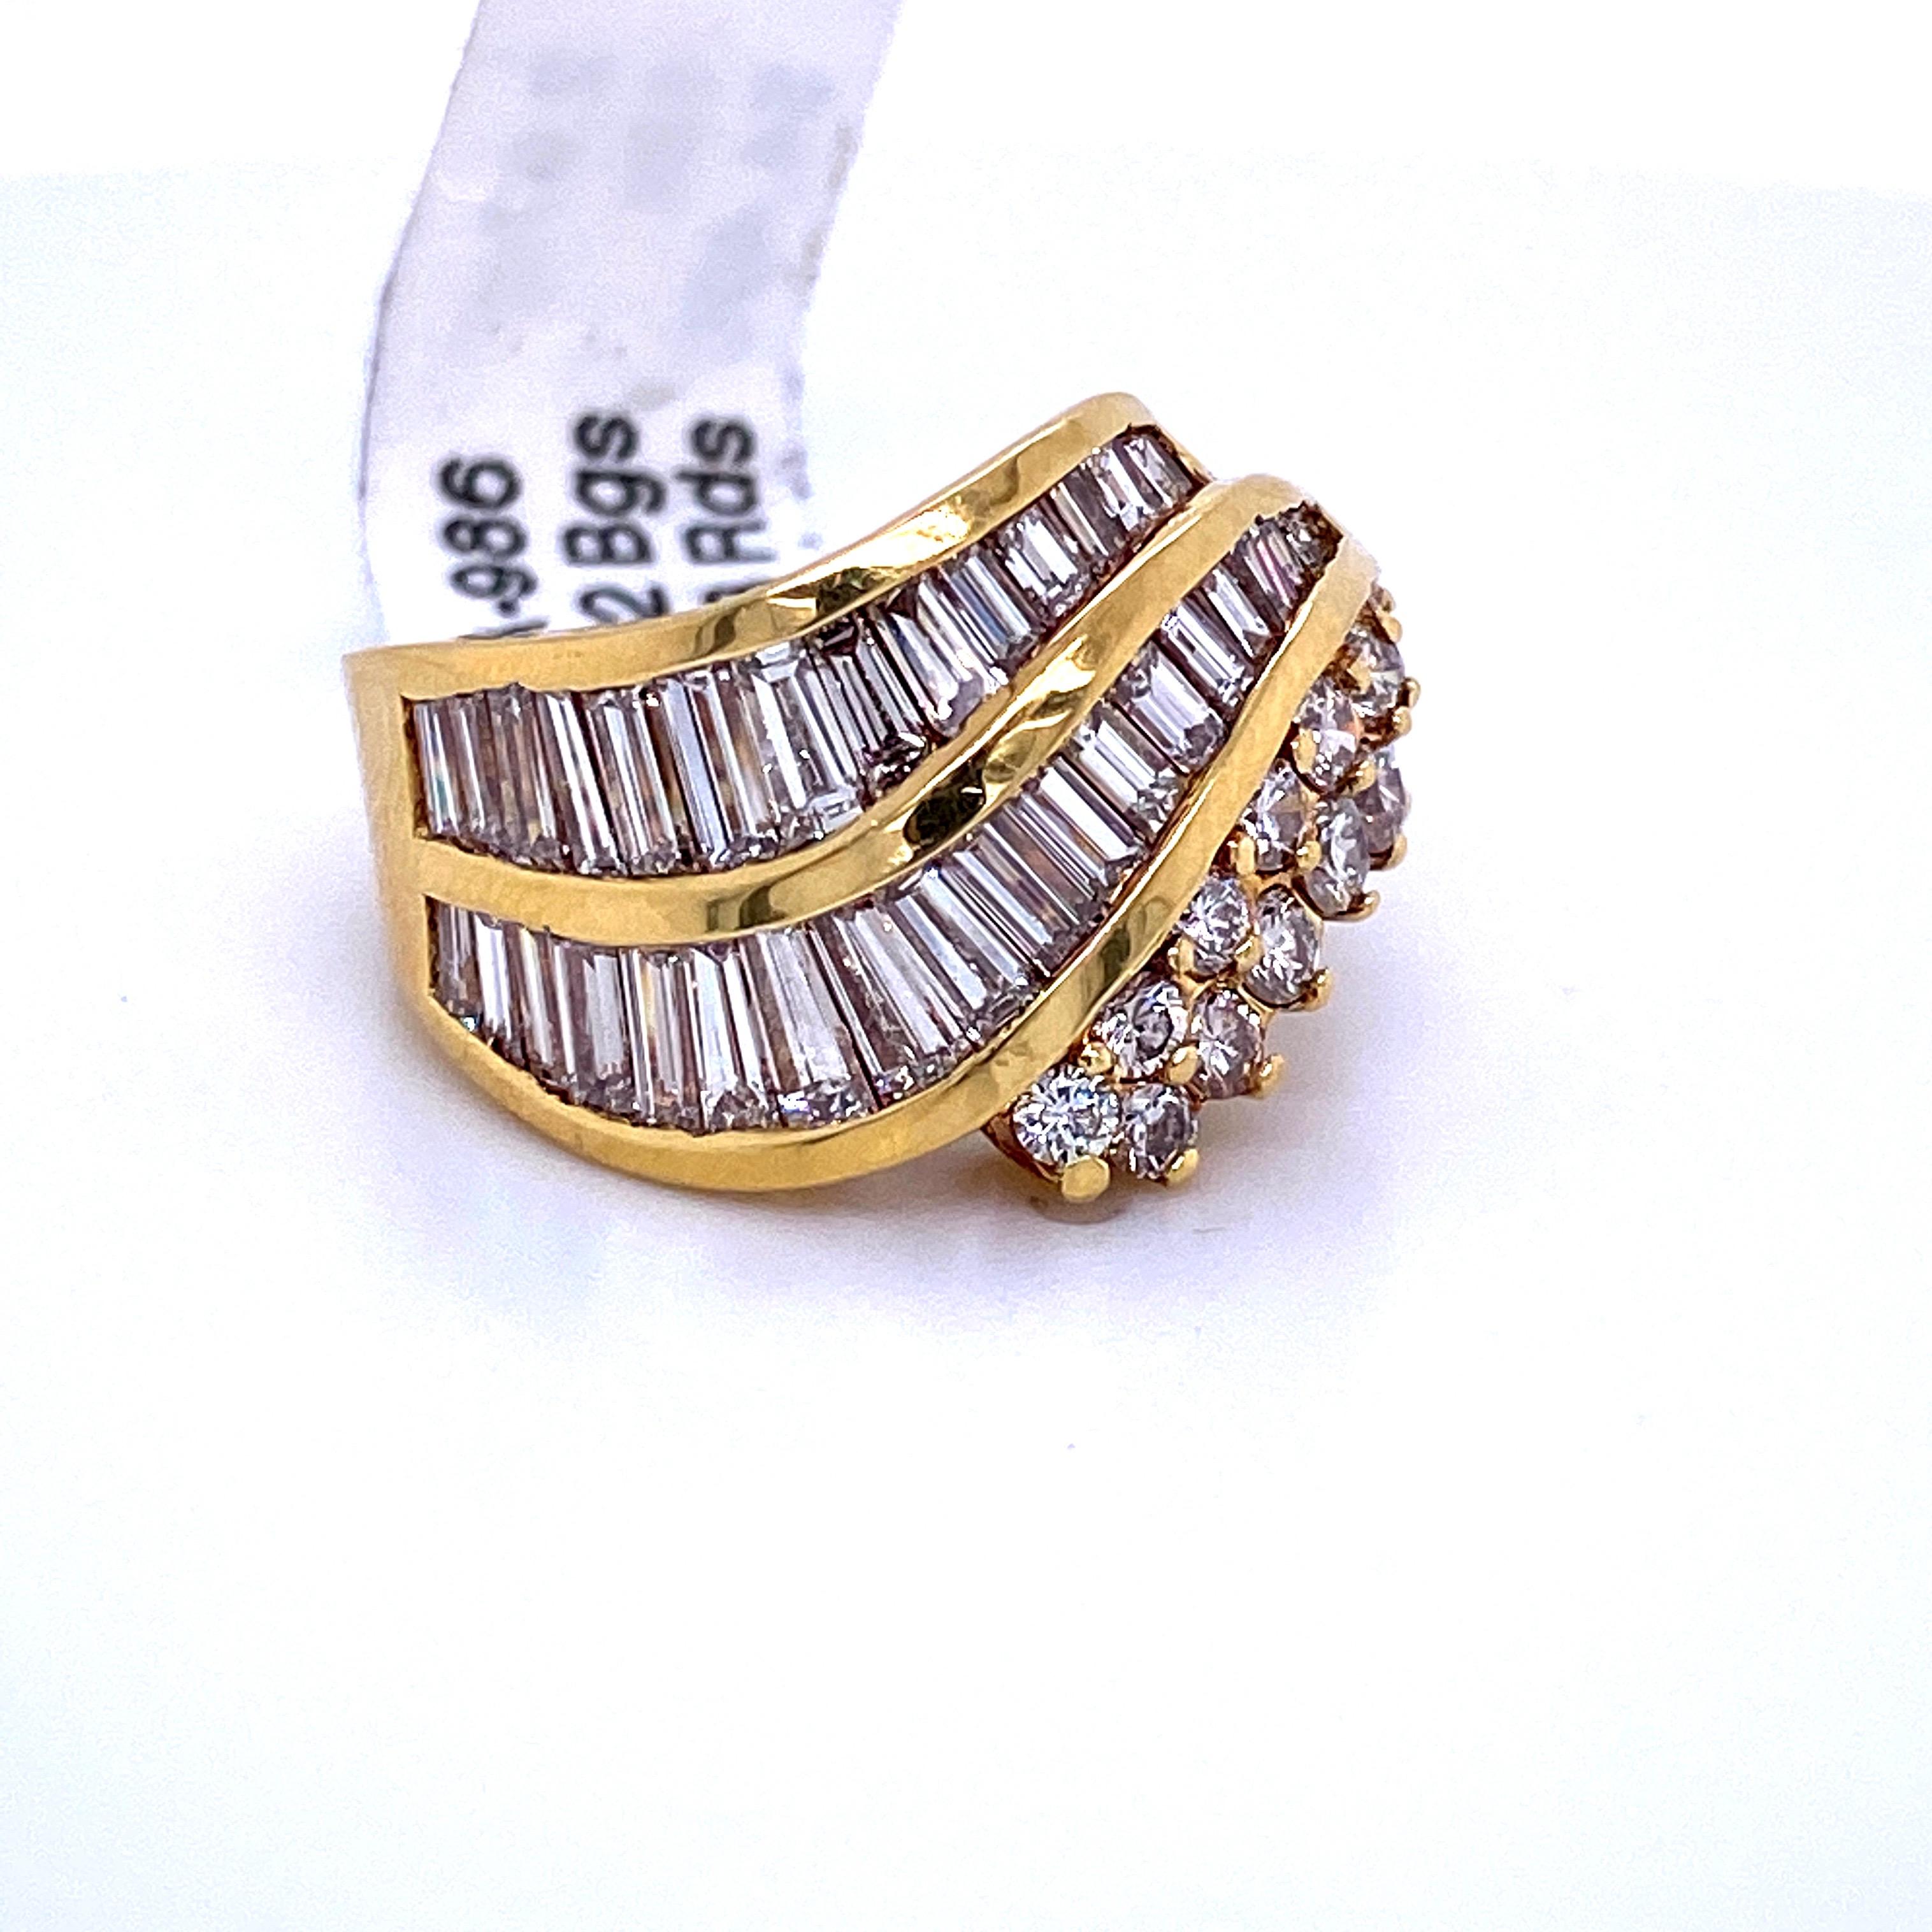 18K Yellow gold ring featuring 32 baguette diamonds and 13 round brilliants weighing 2.97 carats.
Color G
Clarity SI

Size 6.75
Sizeable free of charge